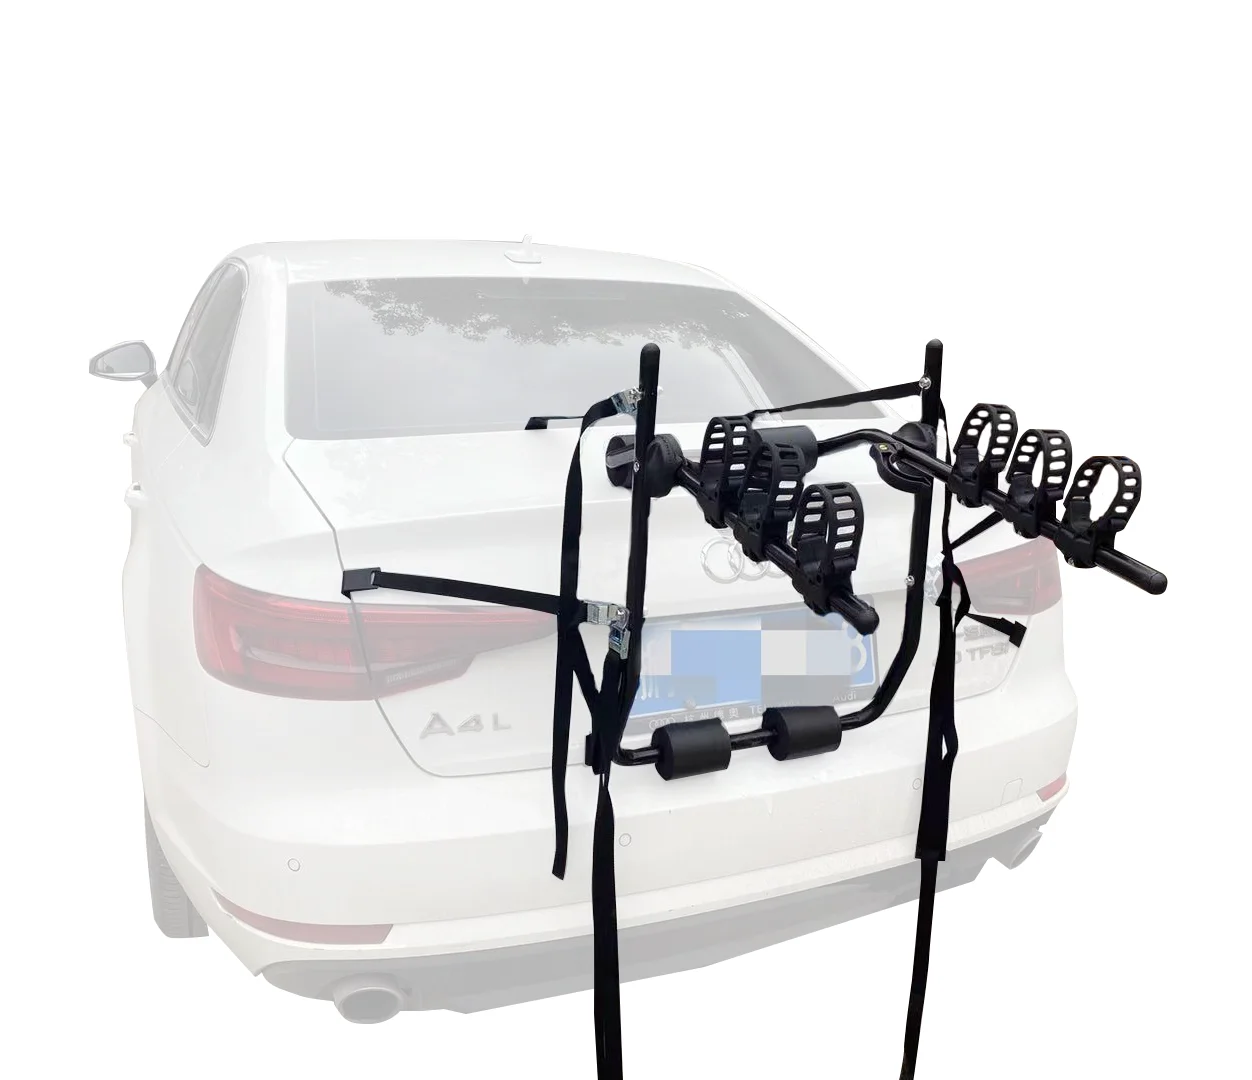 

Most hot sell car bicycle rack bike carrier on Amazon North America, Black